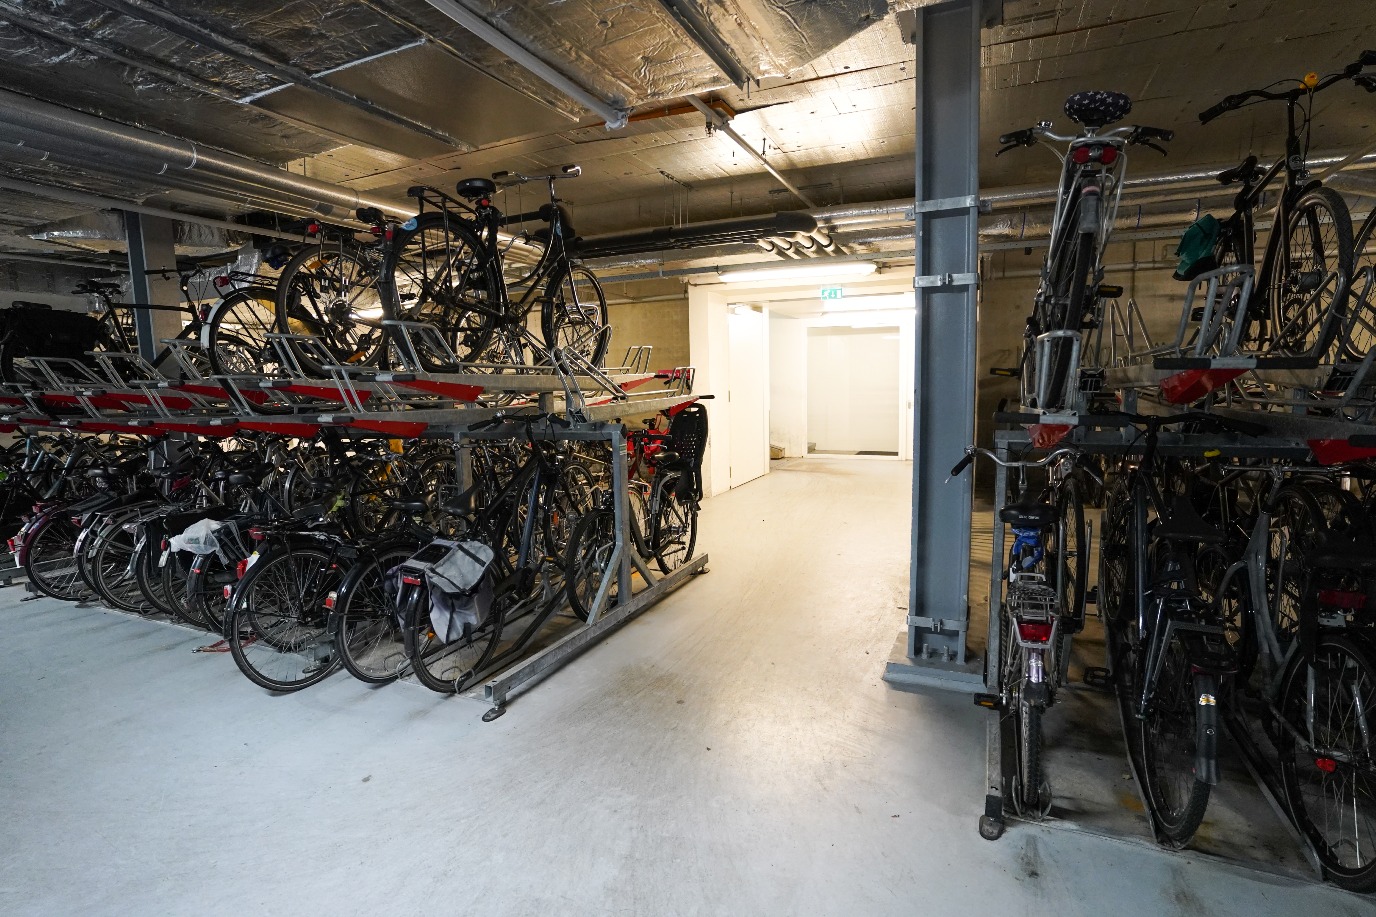 Bicycle basement under the building